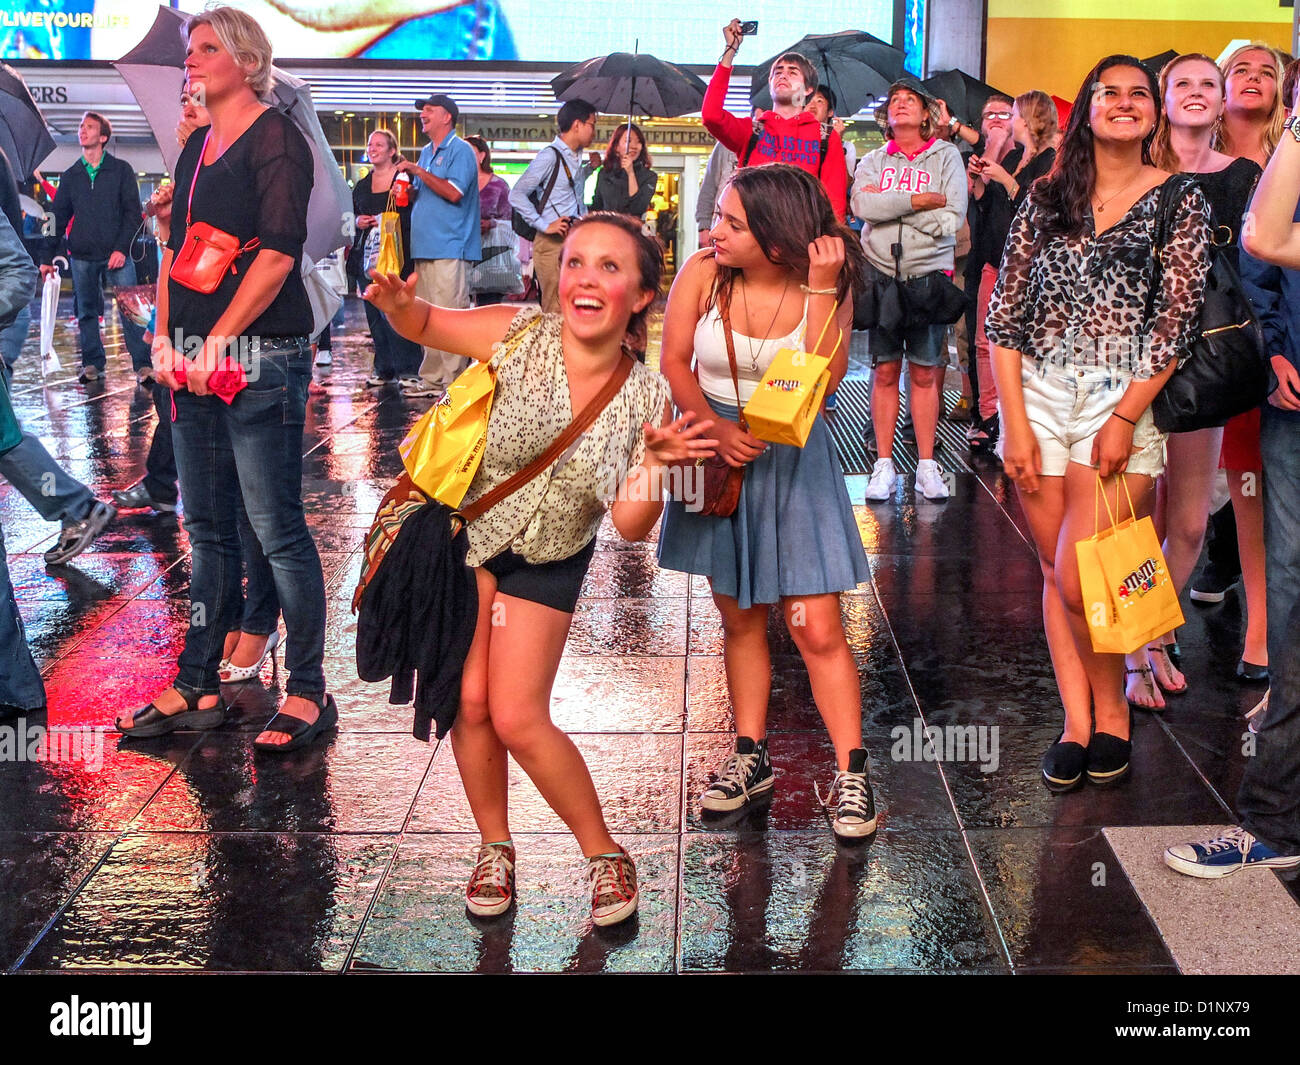 Happy teen girls watch themselves dance before a television camera projecting their image onto a huge screen in Times Square NYC Stock Photo